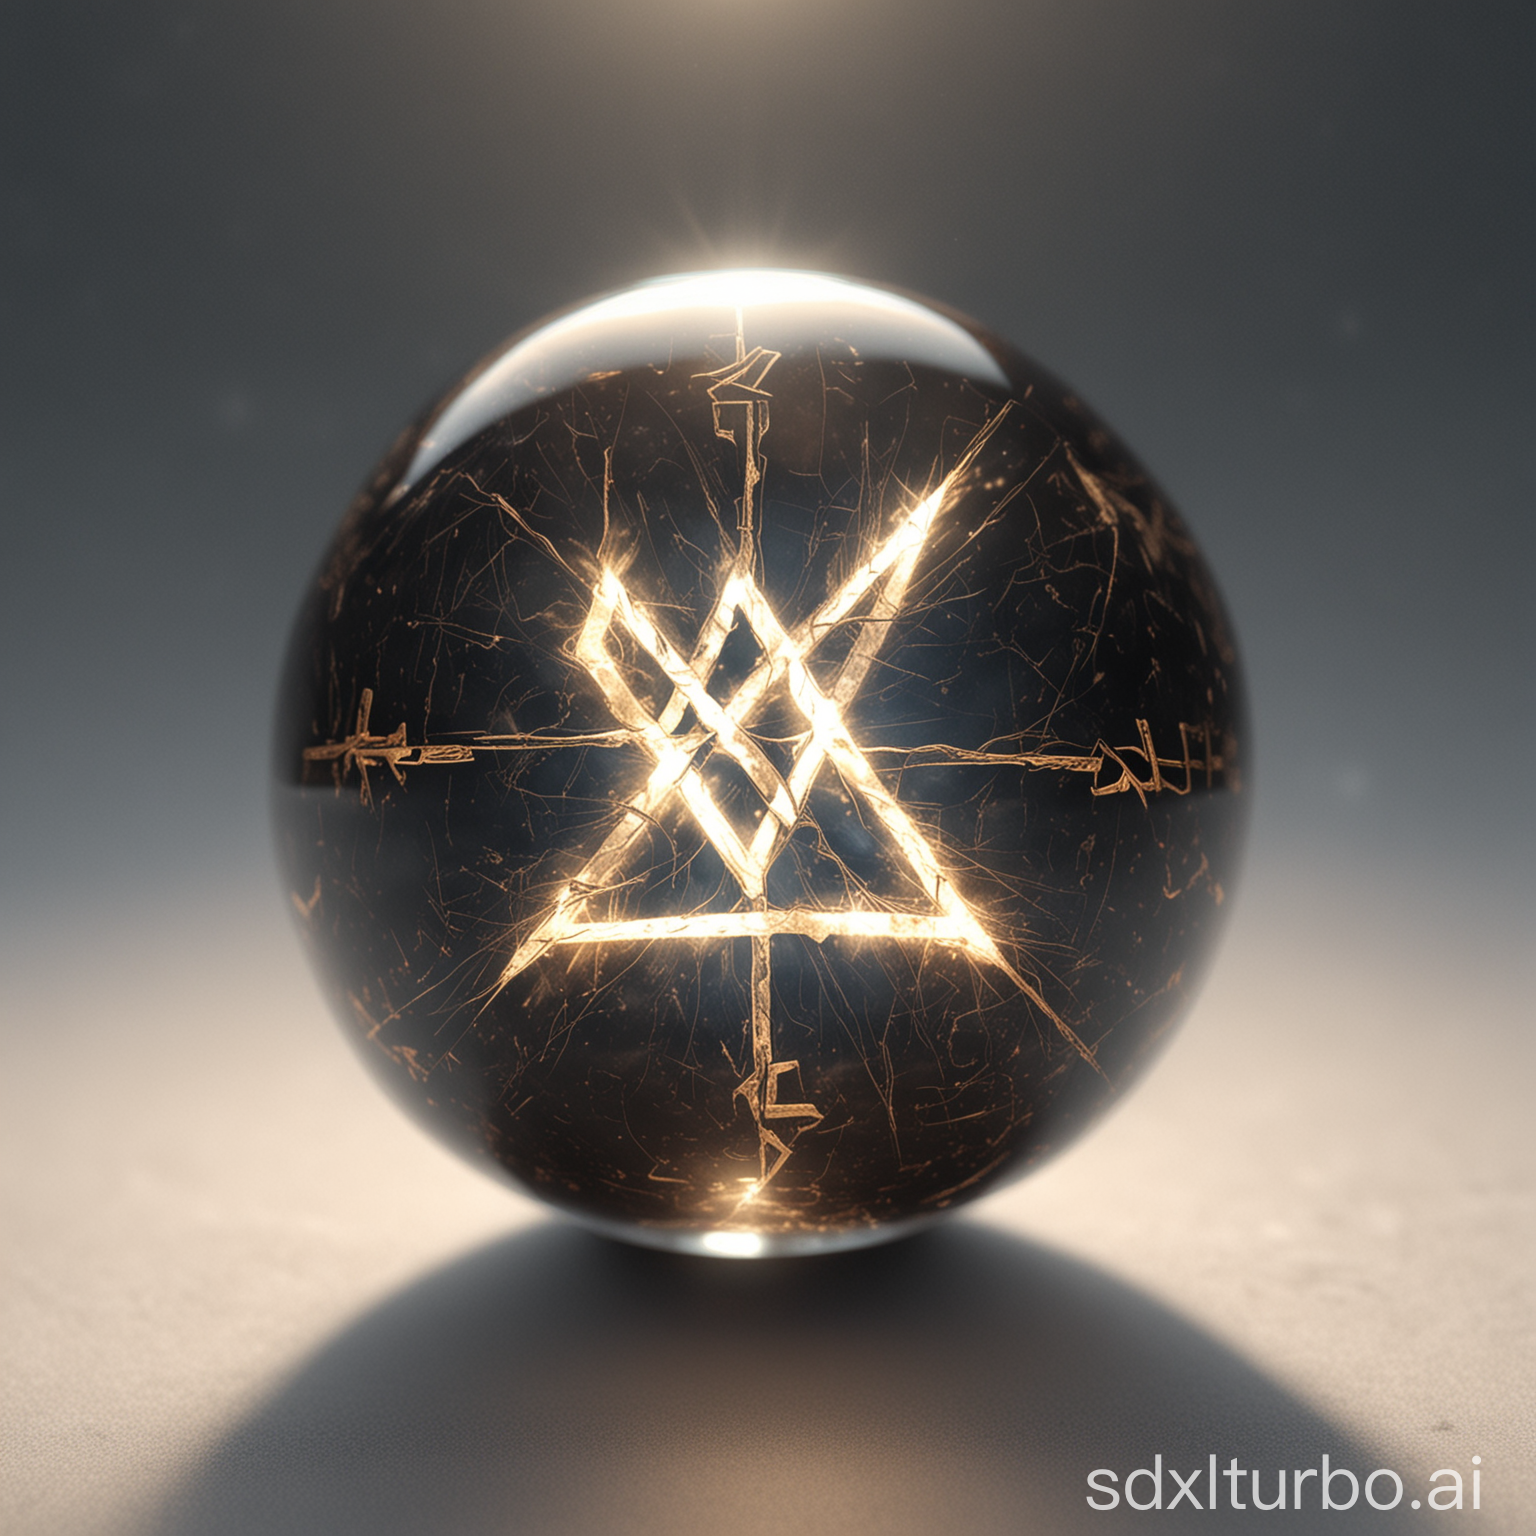 A small circular orb of energy representing a rune of light